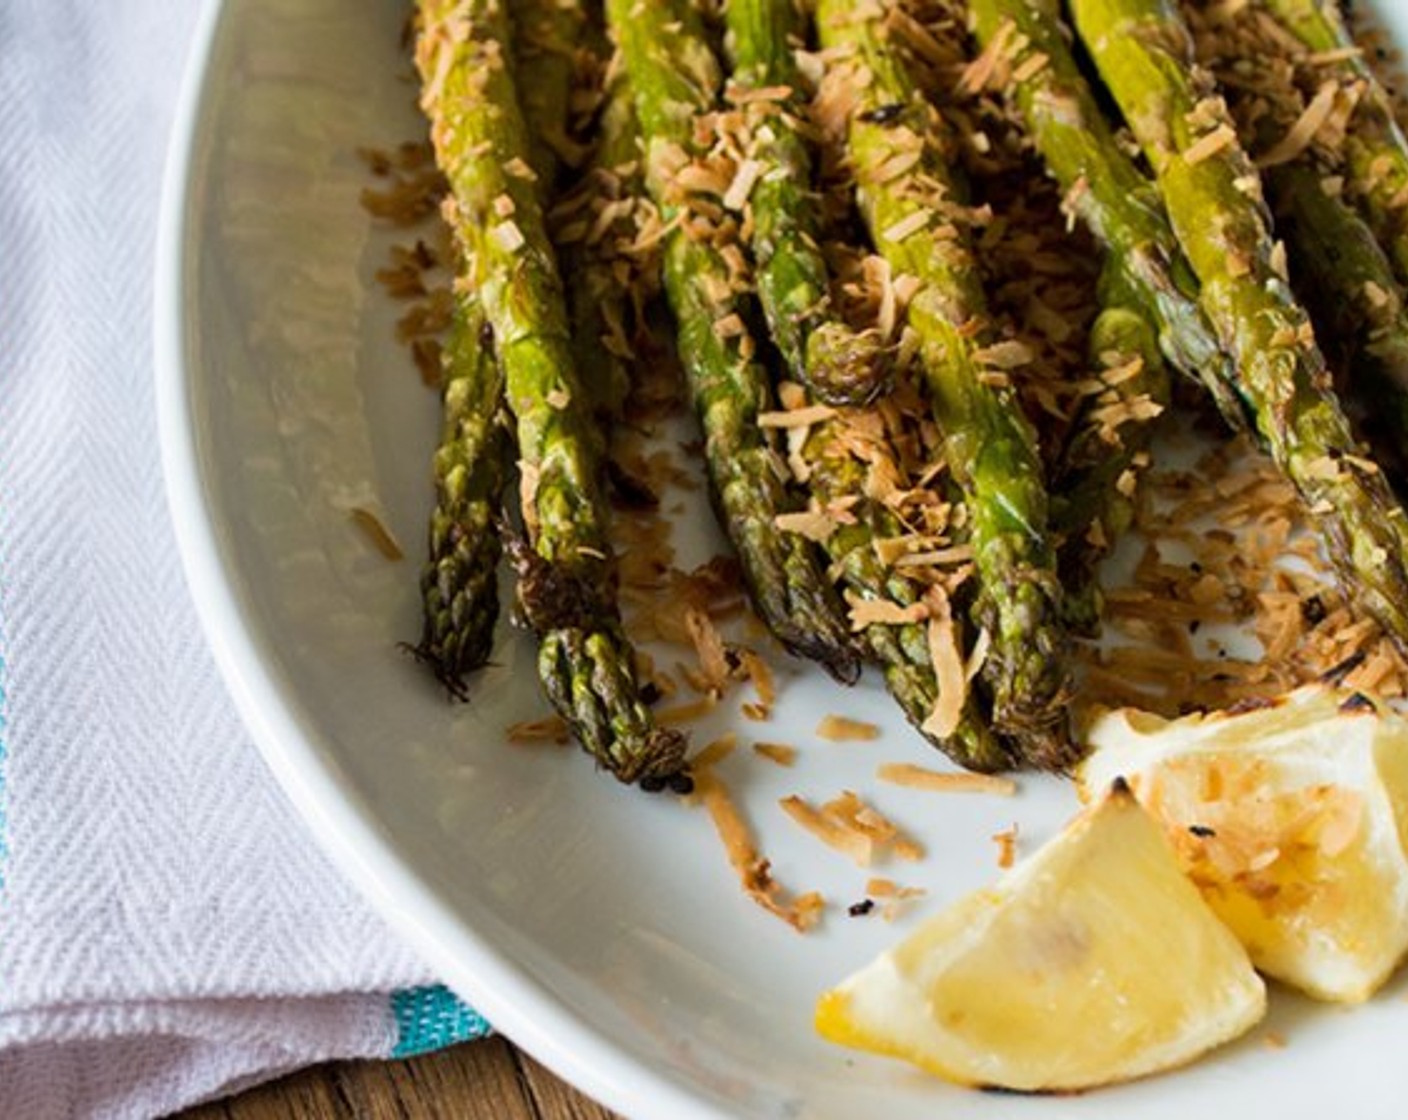 step 10 Top cooked asparagus with toasted coconut, sprinkle Everyday Seasoning (to taste) if desired and serve warm!